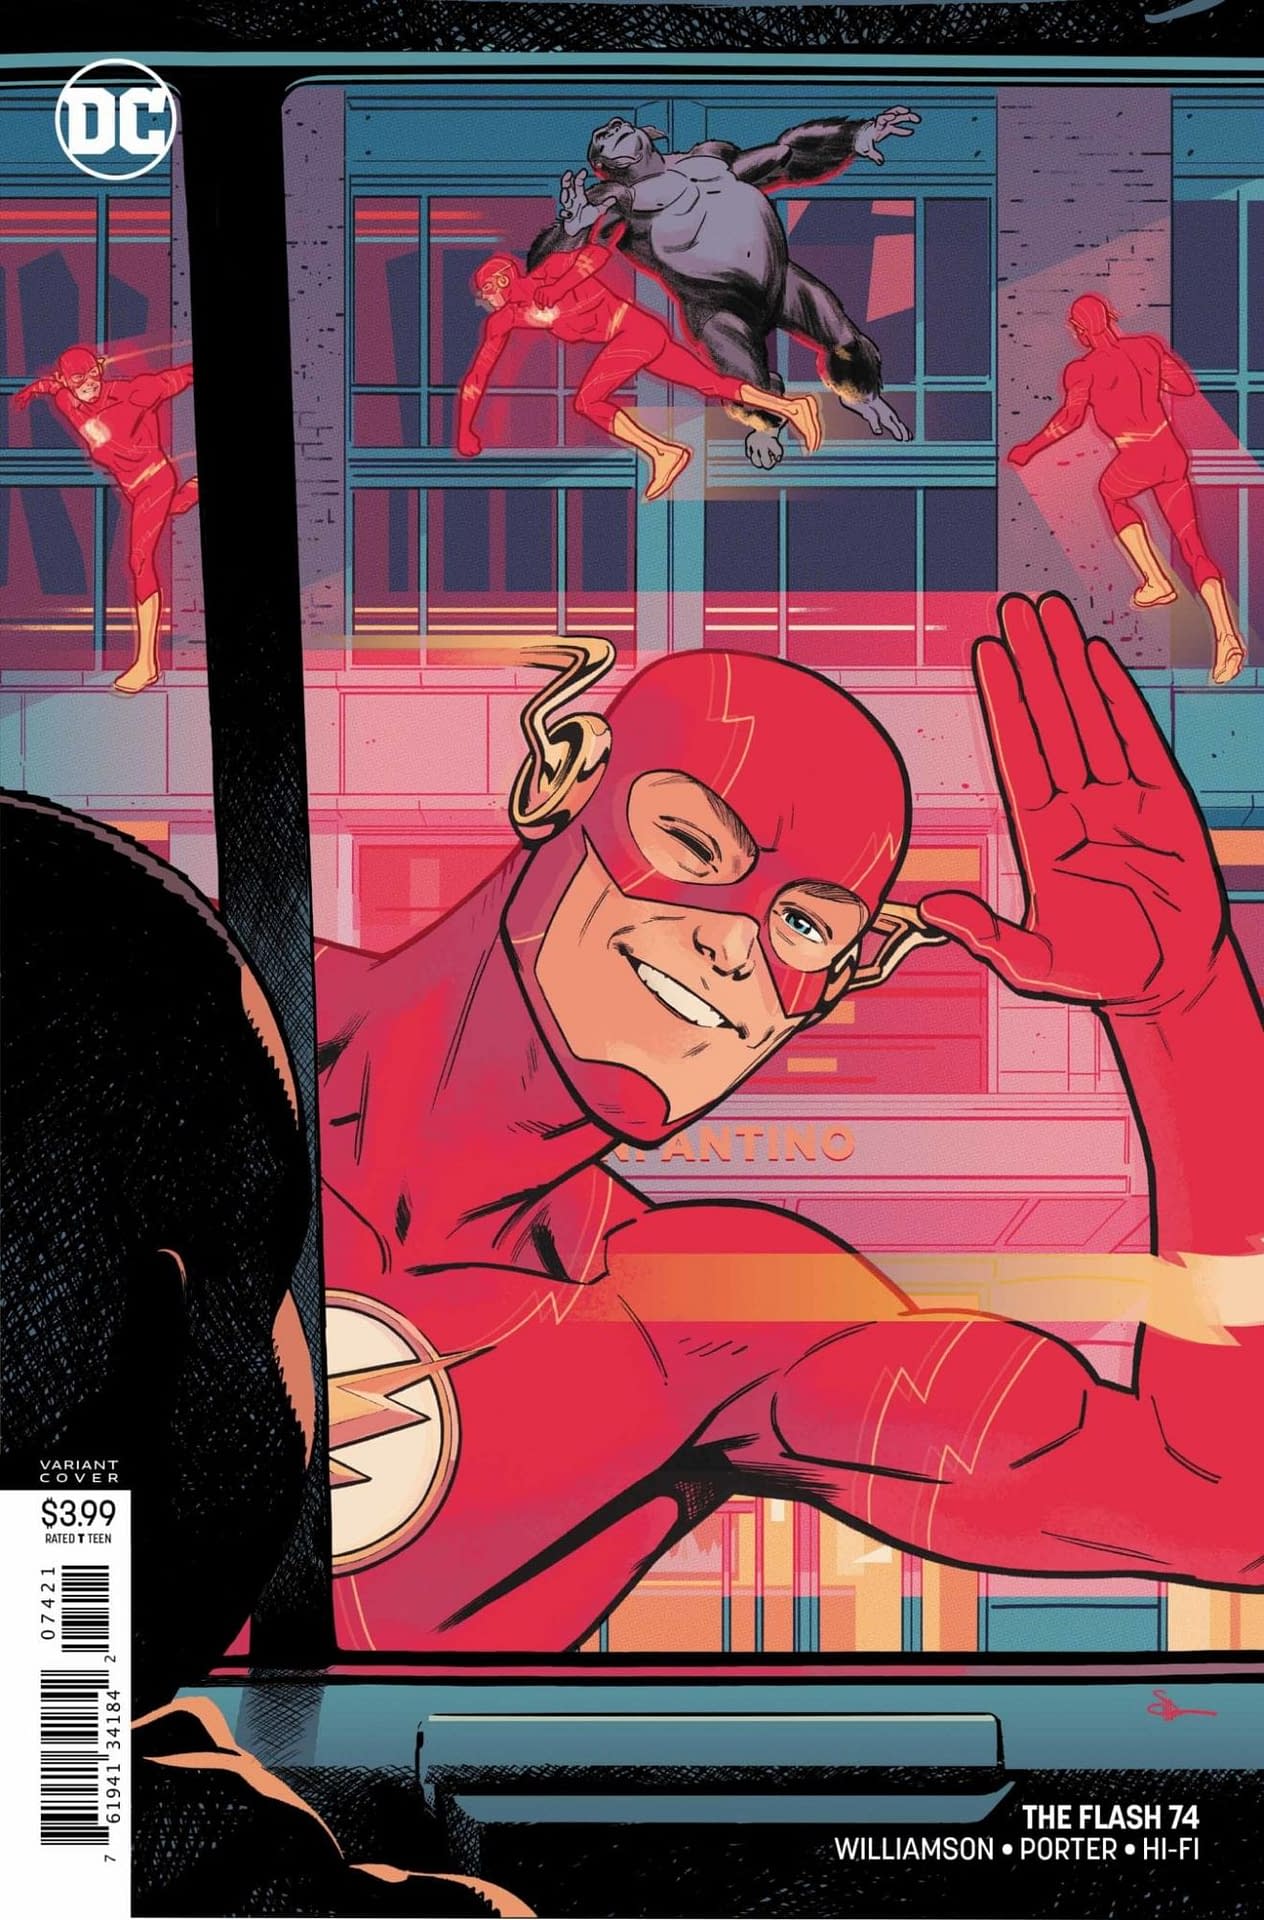 The Flash #74: Journalistic Integrity [Preview]